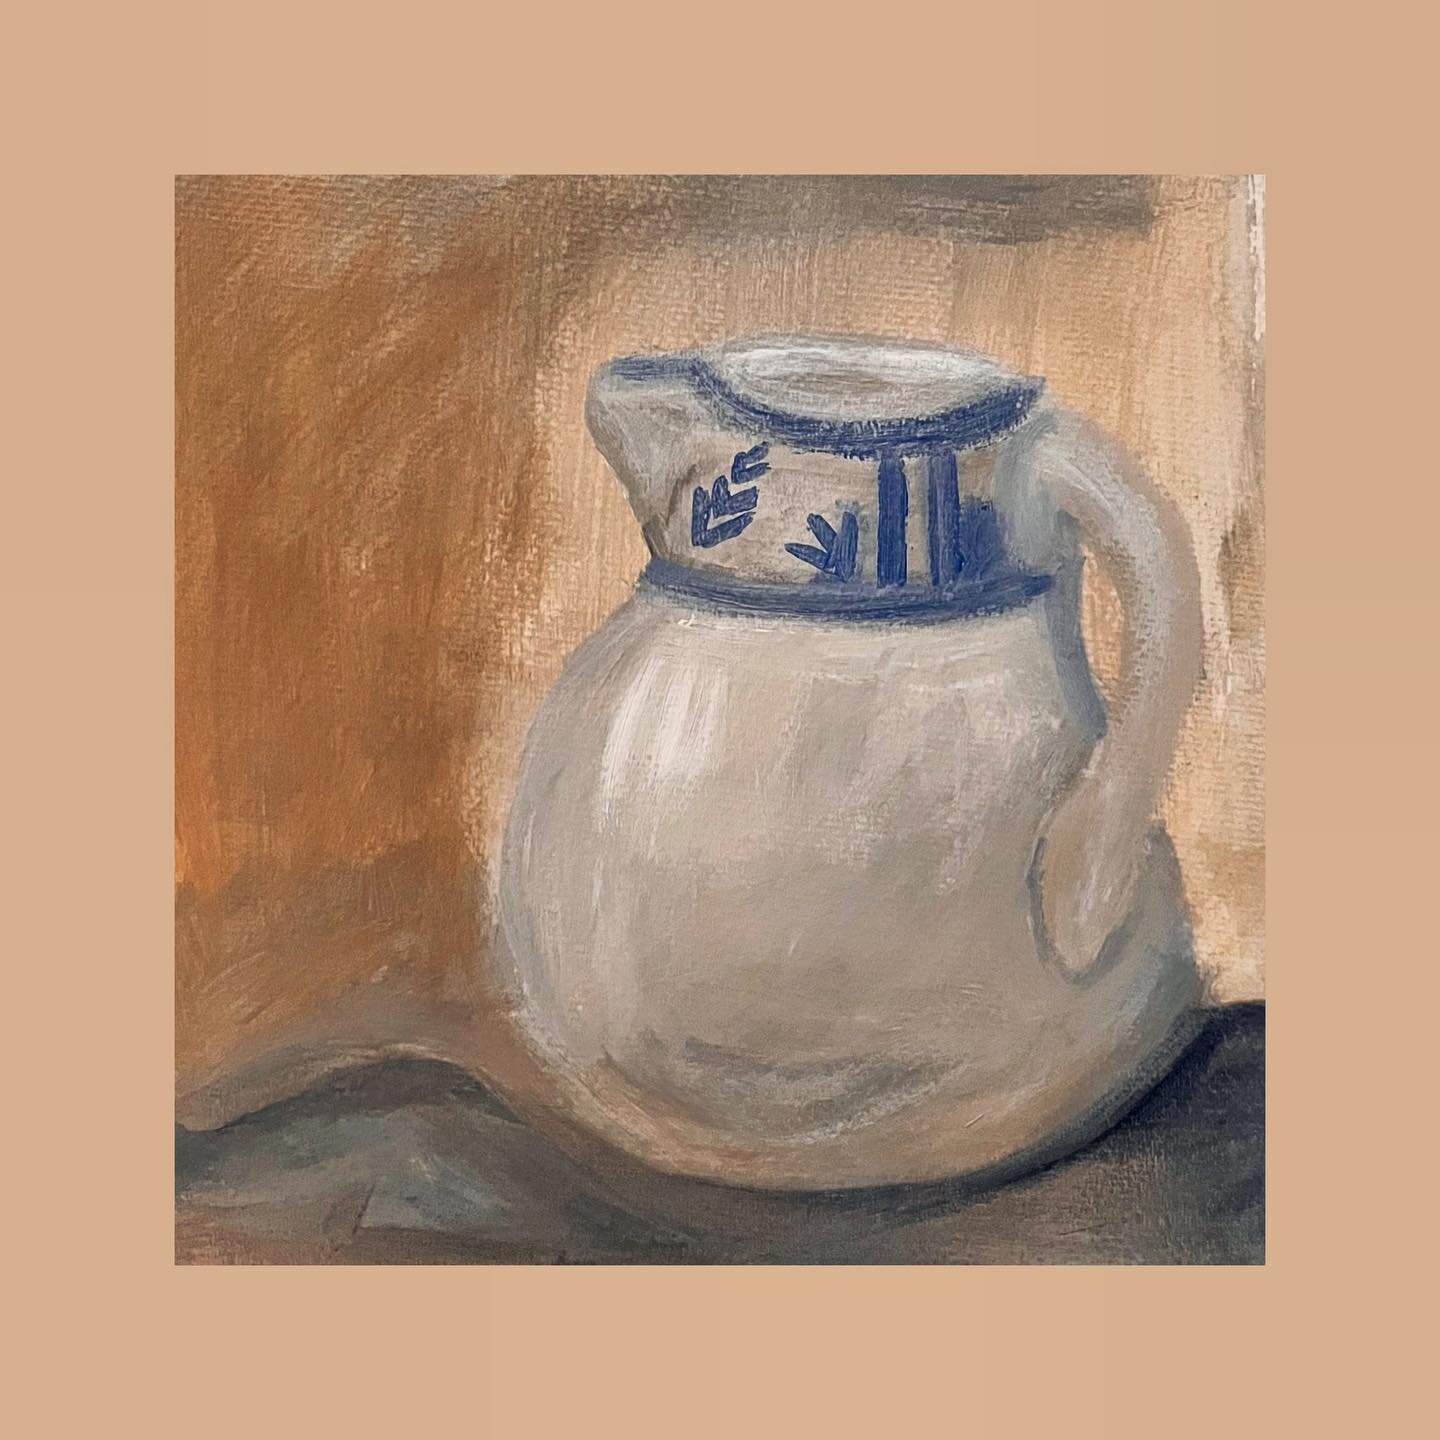 This painting is my interpretation of Larine Chung's original artwork, &quot;White Jug.&quot; 

I drew inspiration from Chung's composition and style; using acrylics, I aimed to capture the essence and beauty of the original.
.
.
.
#acrylicpainting #